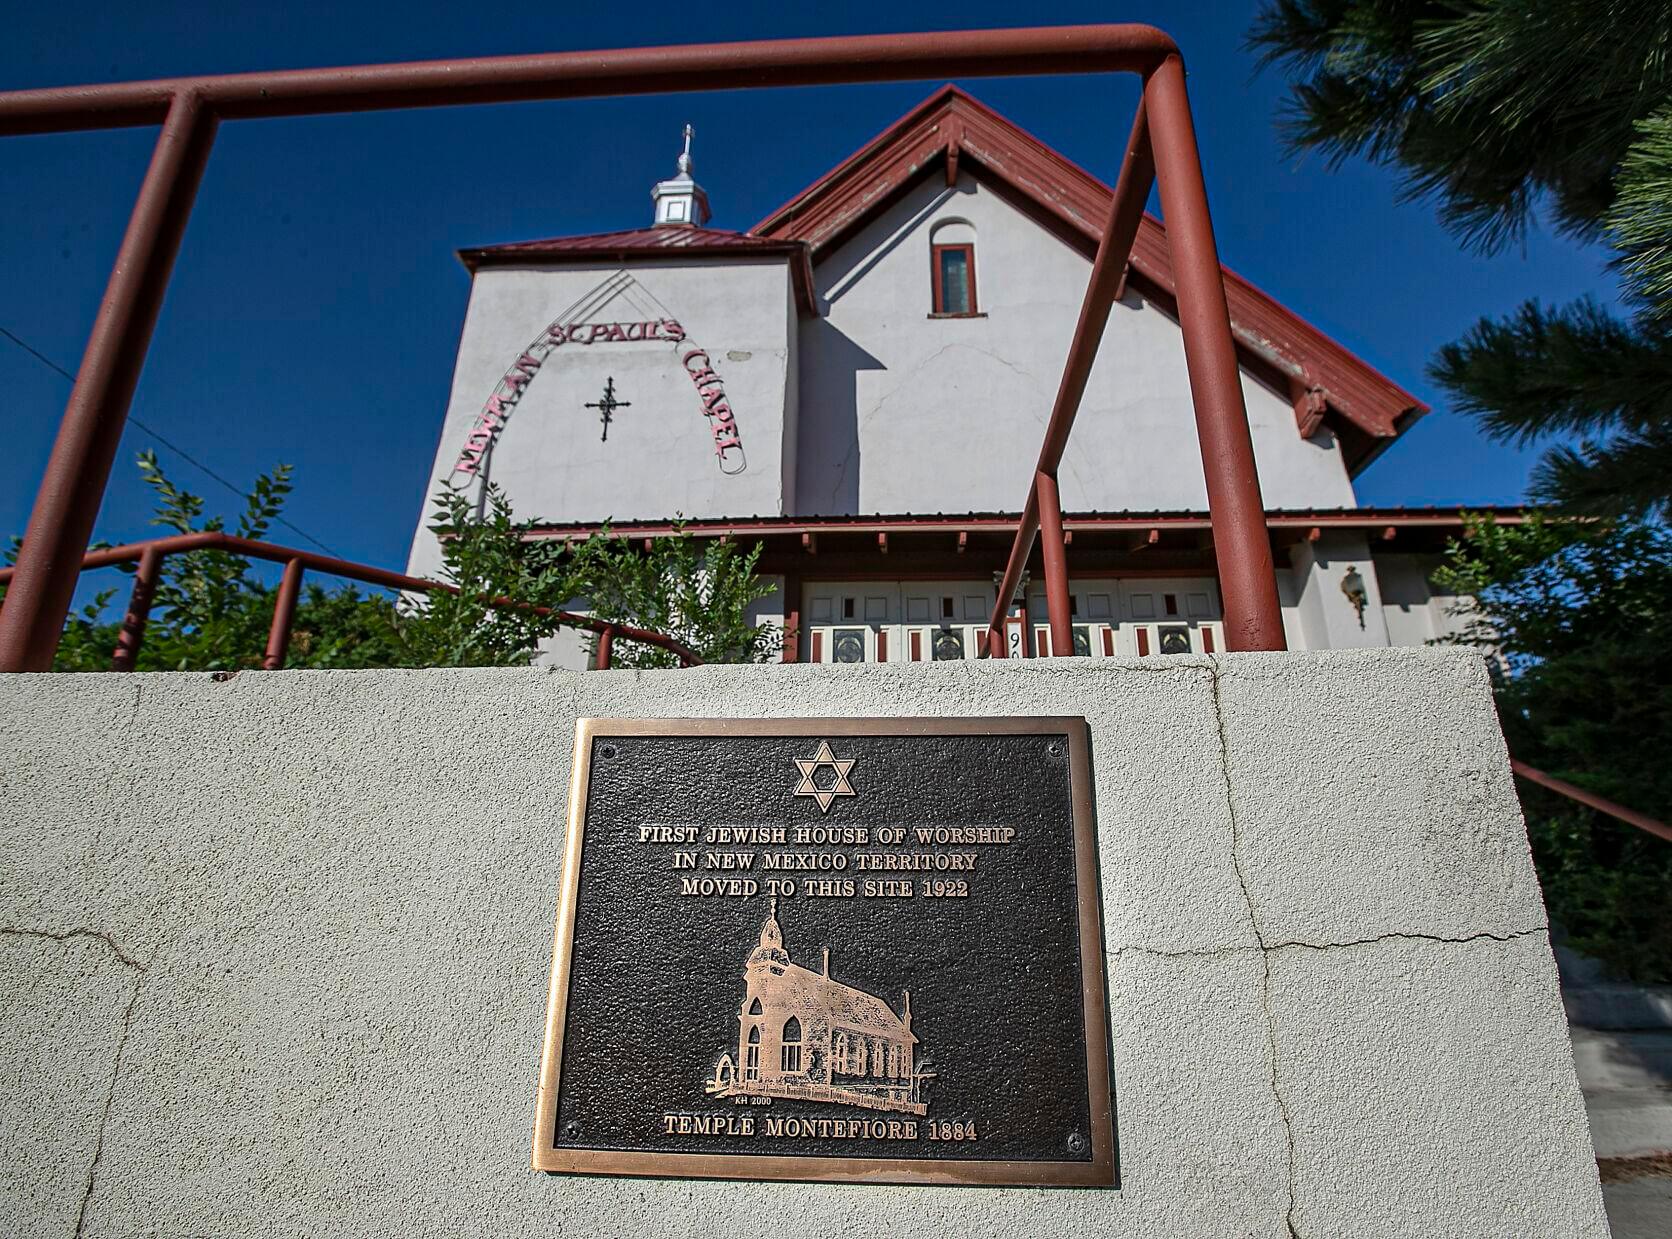 Members of the Jewish community in Las Vegas, New Mexico, are trying to purchase Temple Montefiore, the oldest synagogue in the state, from the Archdiocese of Santa Fe.